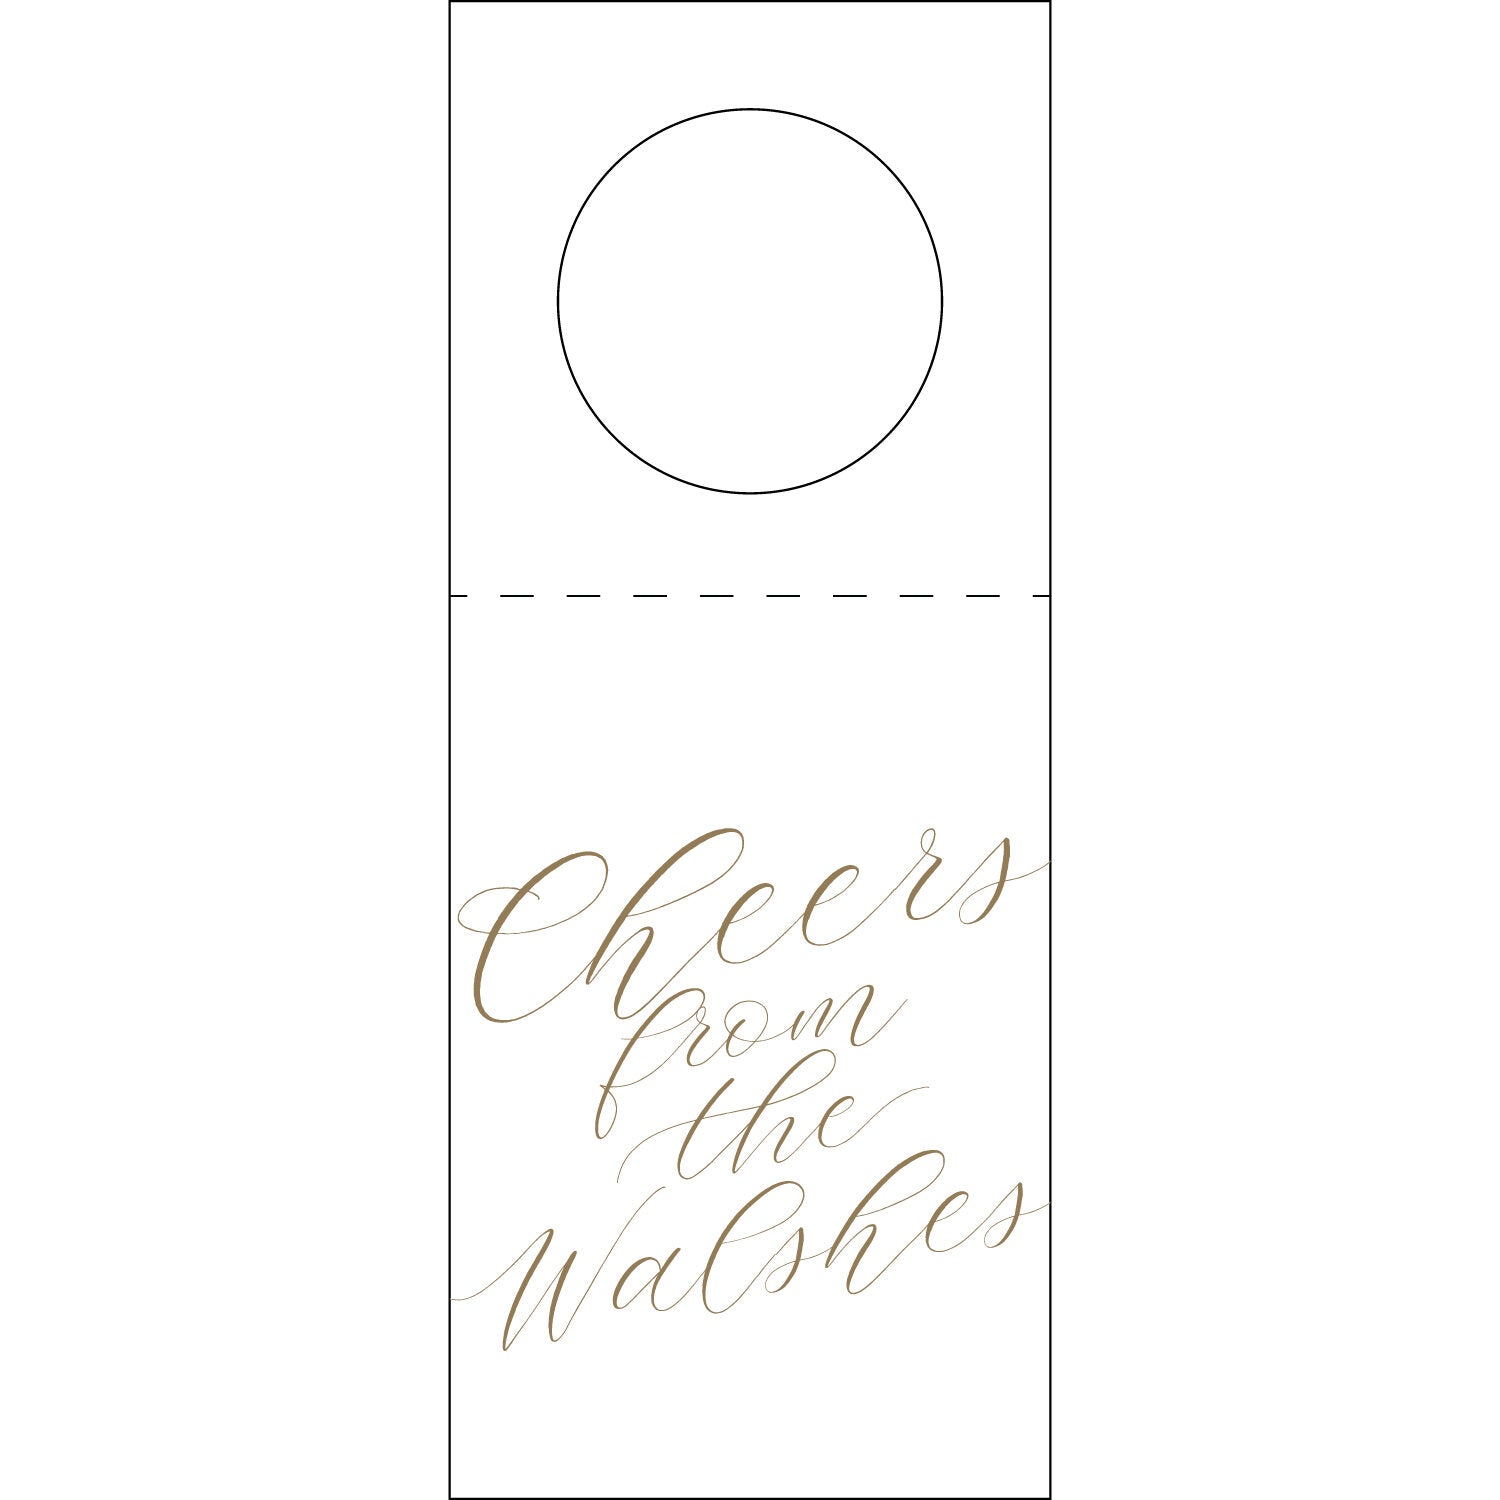 Personalized "Cheers" Script Wine Tag